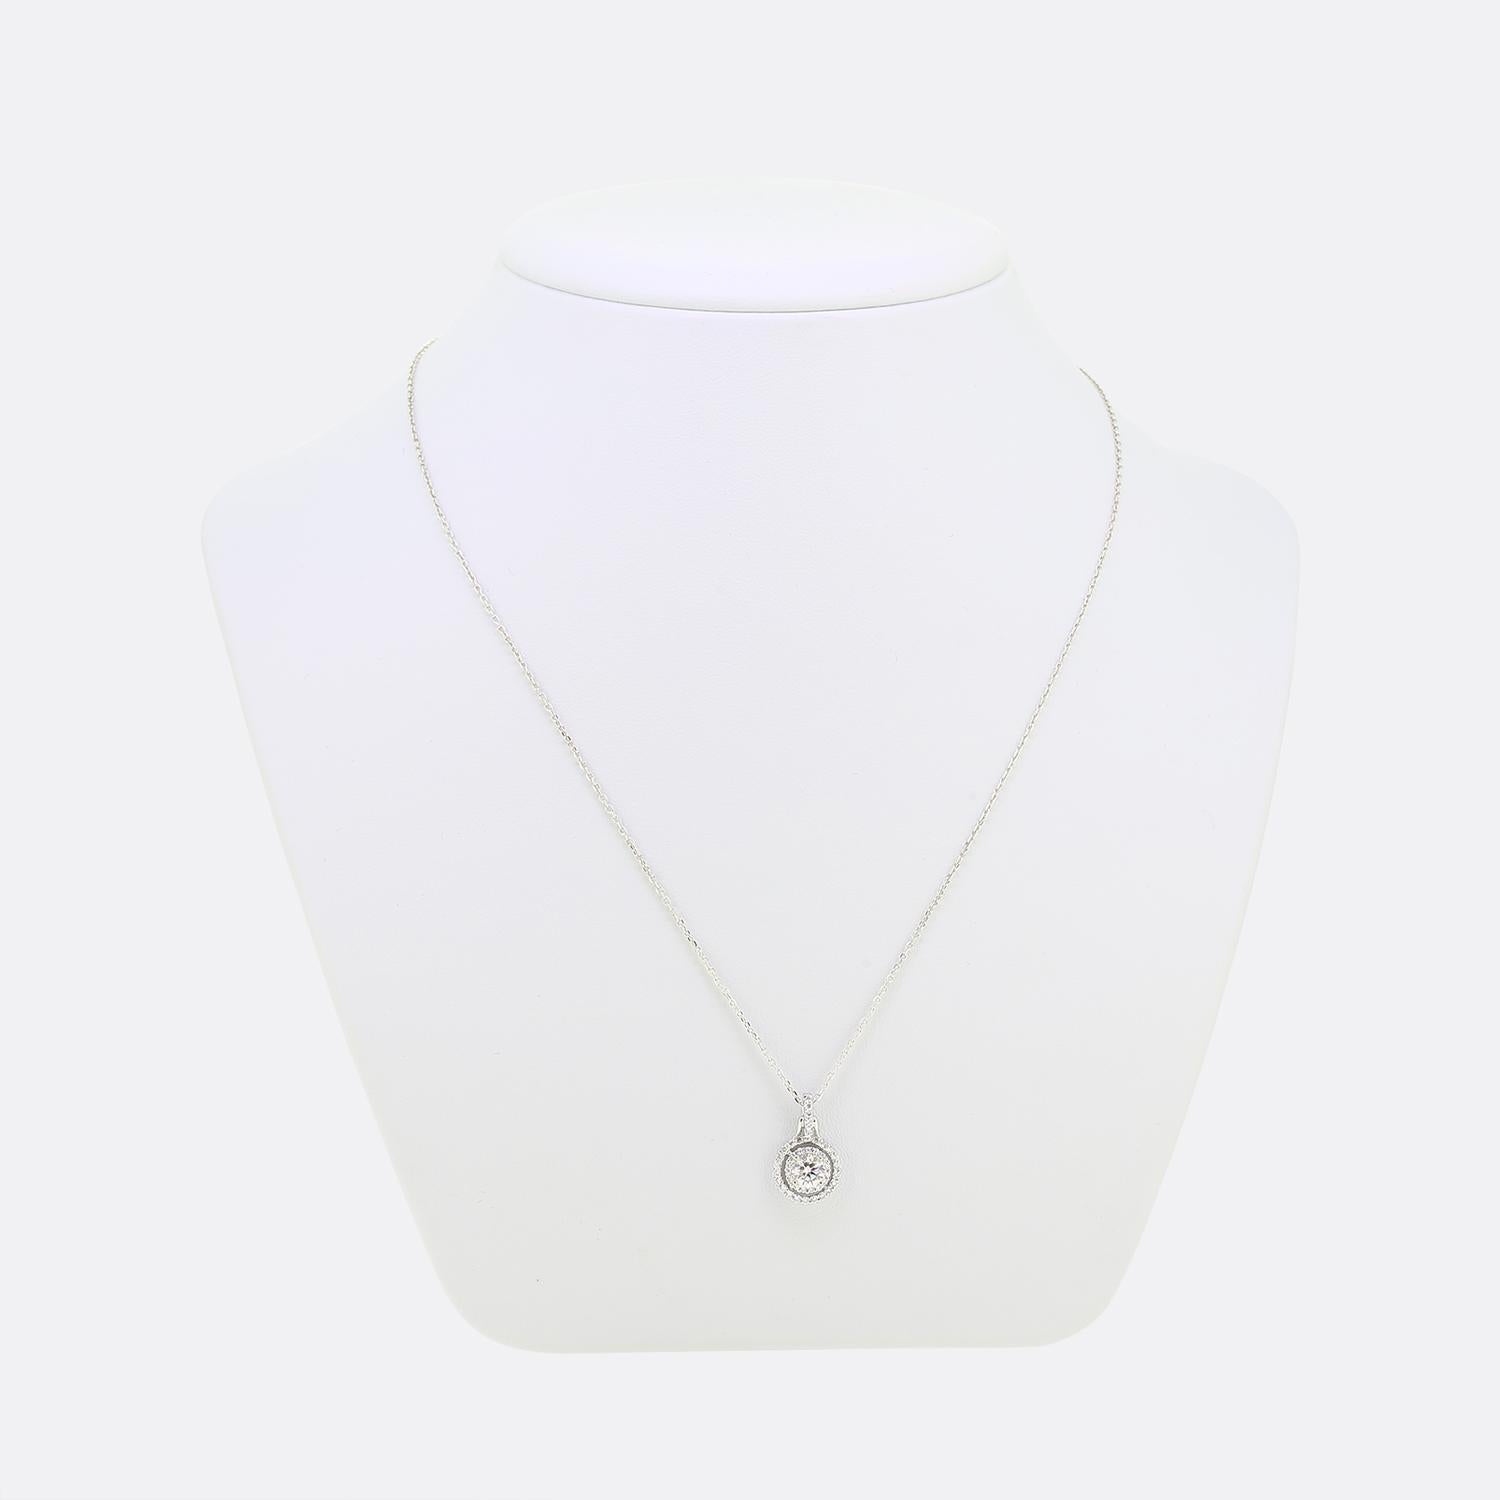 Here we have a delightful diamond halo pendant necklace. This pendant has been crafted from 14ct white gold and plays host to a single 0.45ct round brilliant cut diamond. This principal stone sits slightly risen in a four-clawed setting at the